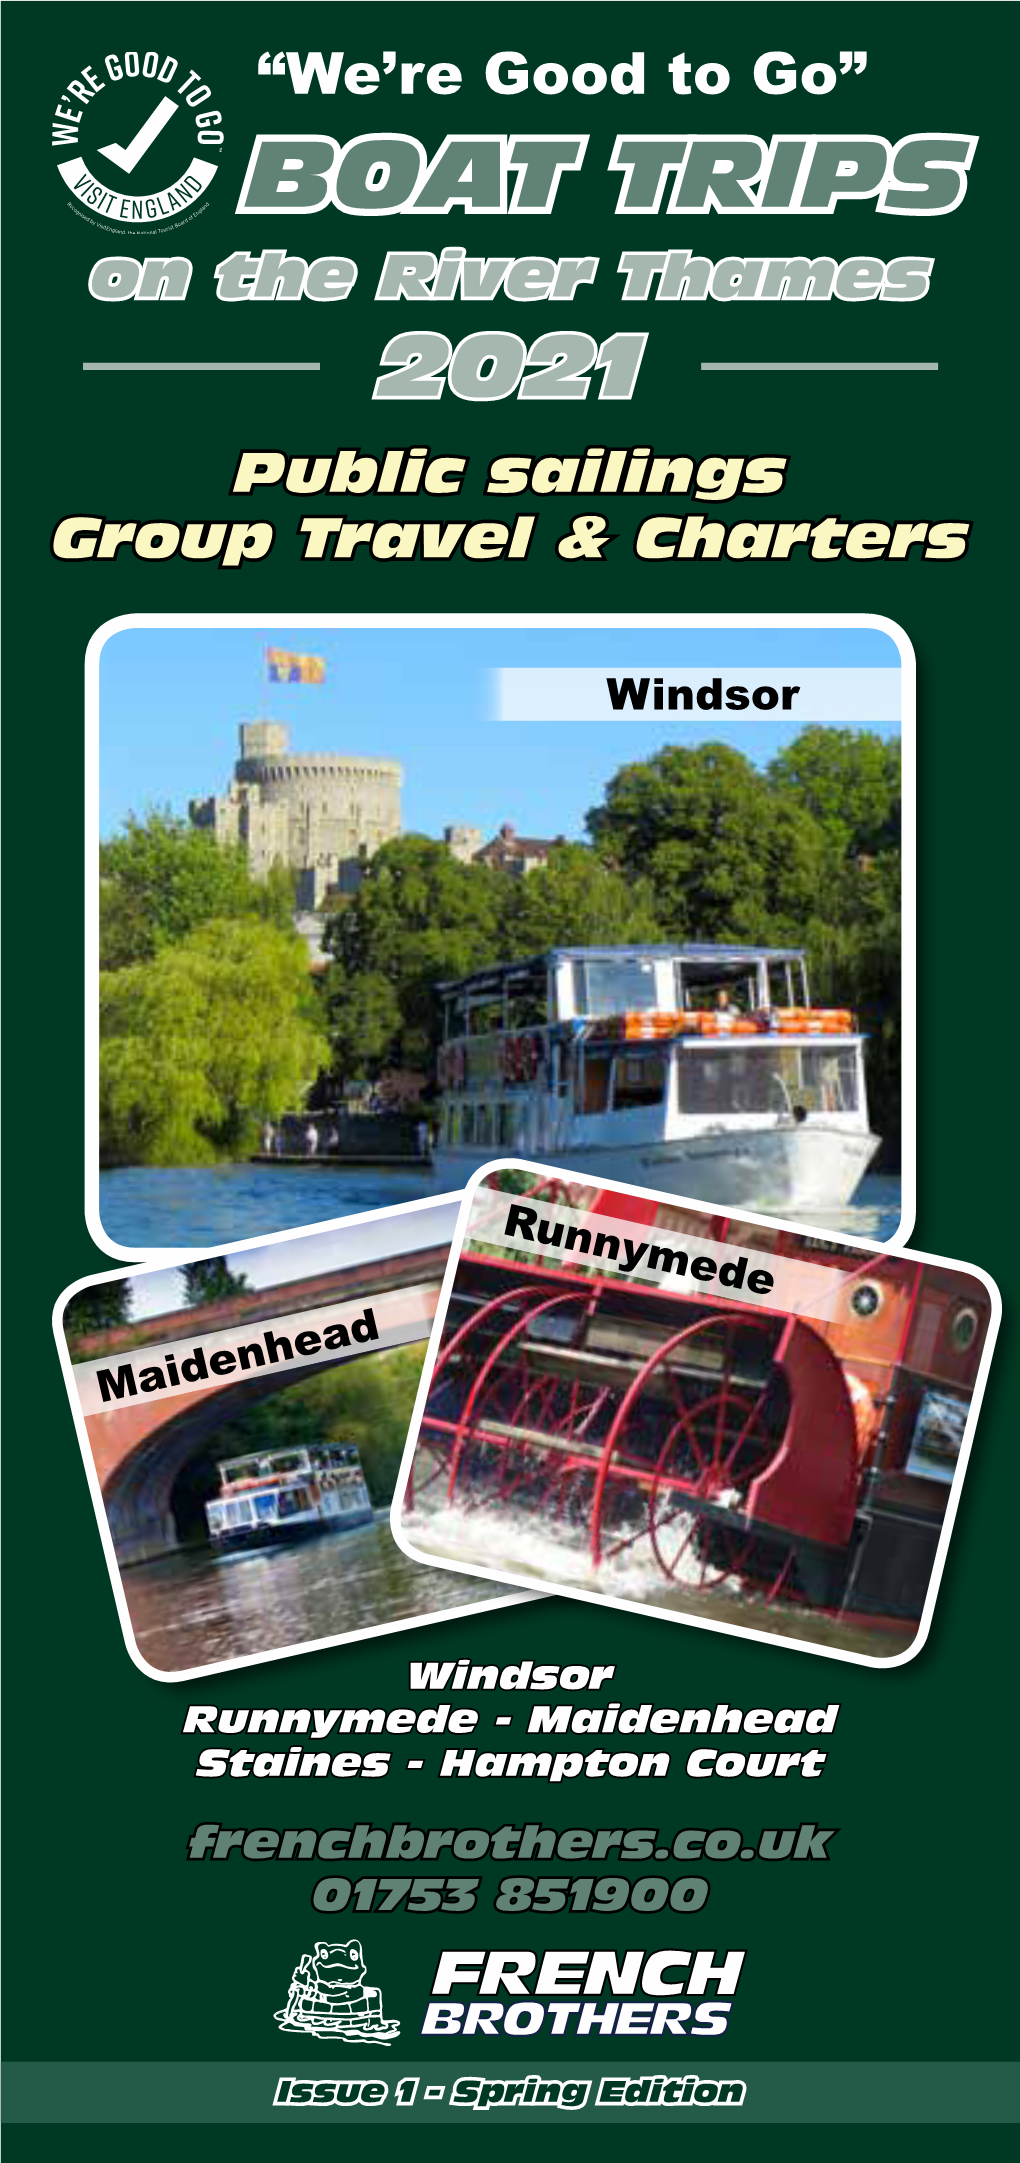 BOAT TRIPS on the River Thames 2021 Public Sailings Group Travel & Charters